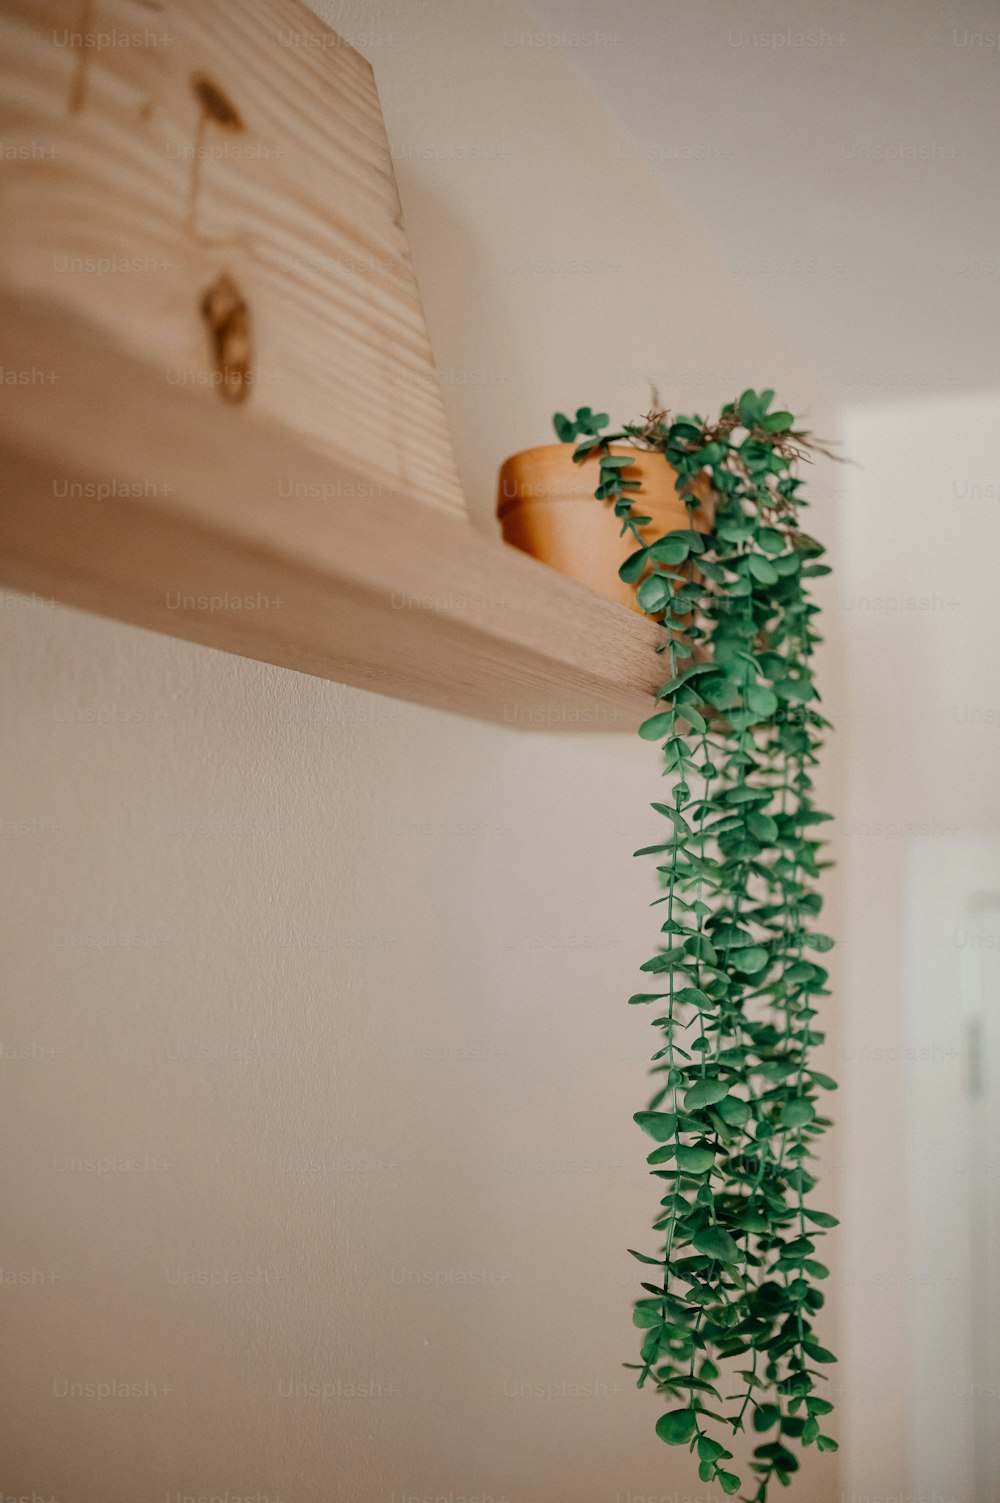 a green plant is growing on a wooden shelf